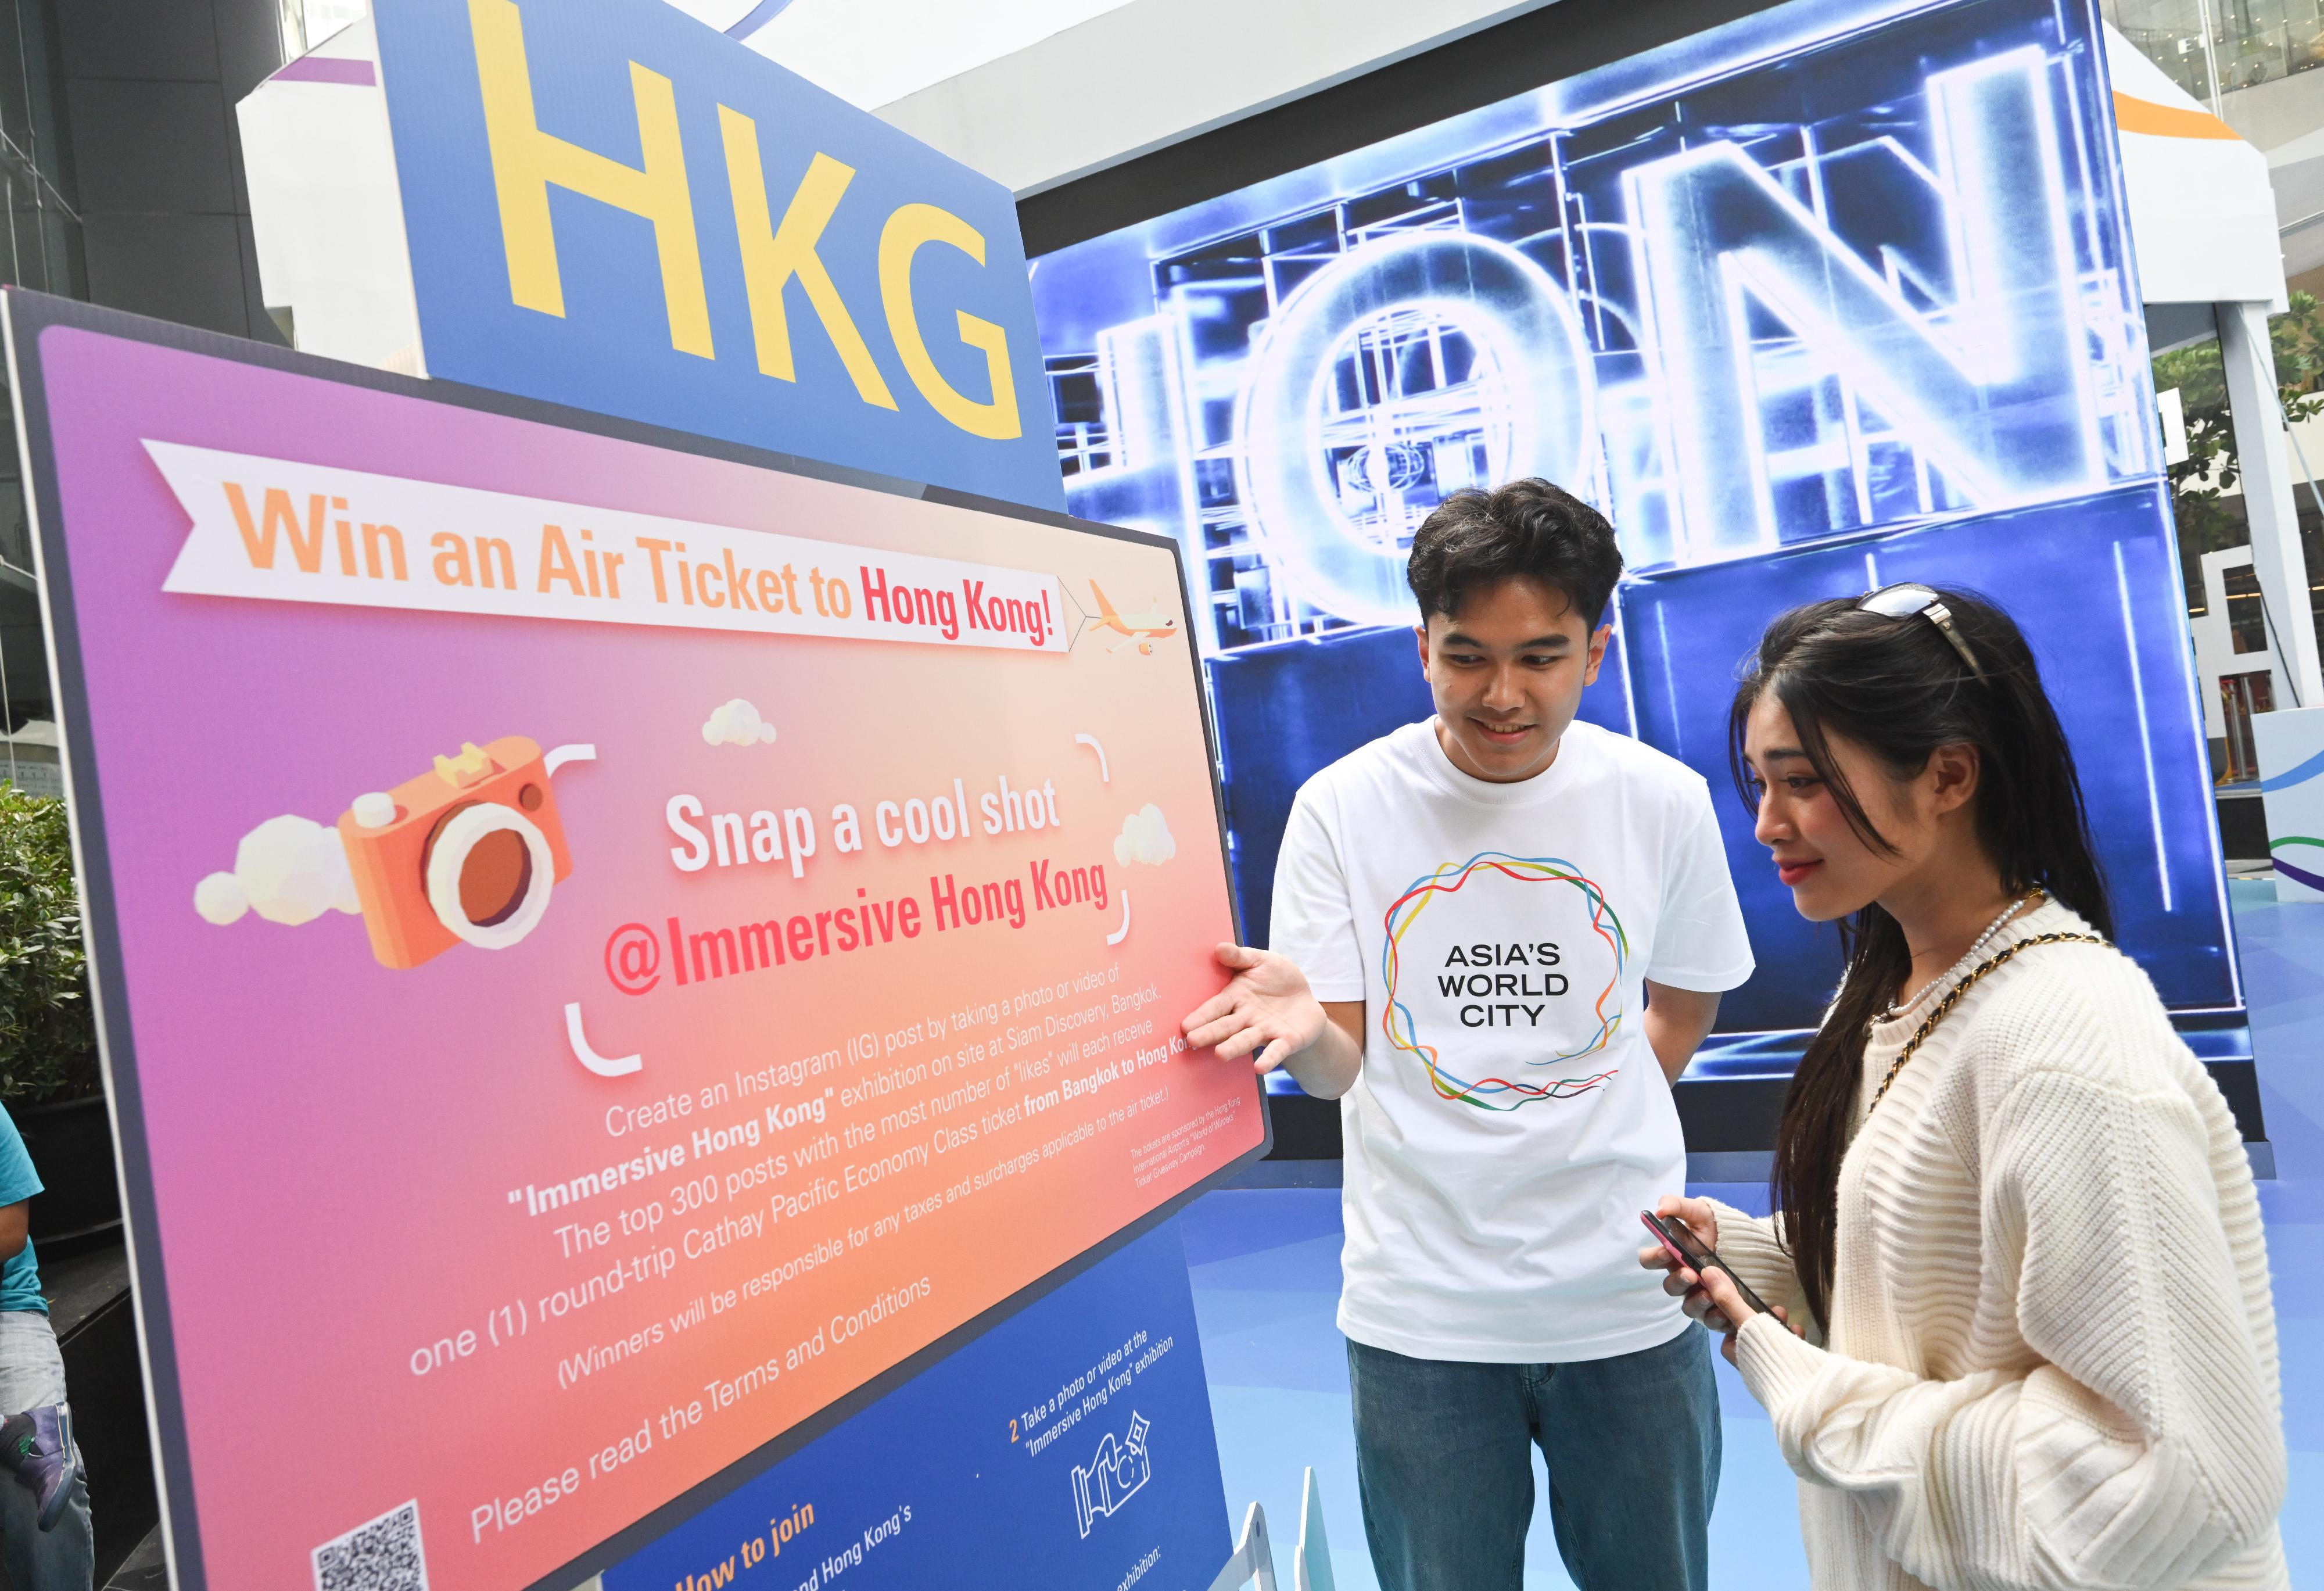 The "Immersive Hong Kong" roving exhibition, which showcases Hong Kong's unique strengths, advantages and opportunities with art technology, was launched in Bangkok, Thailand, today (October 20) as part of a promotional campaign in Association of Southeast Asian Nations countries. An interactive game, "Snap a cool shot @Immersive Hong Kong", is ongoing at the exhibition, with air tickets from Bangkok to Hong Kong sponsored by Hong Kong International Airport's "World of Winners" Tickets Giveaway Campaign as prizes. Photo shows a visitor looking at information of the game.